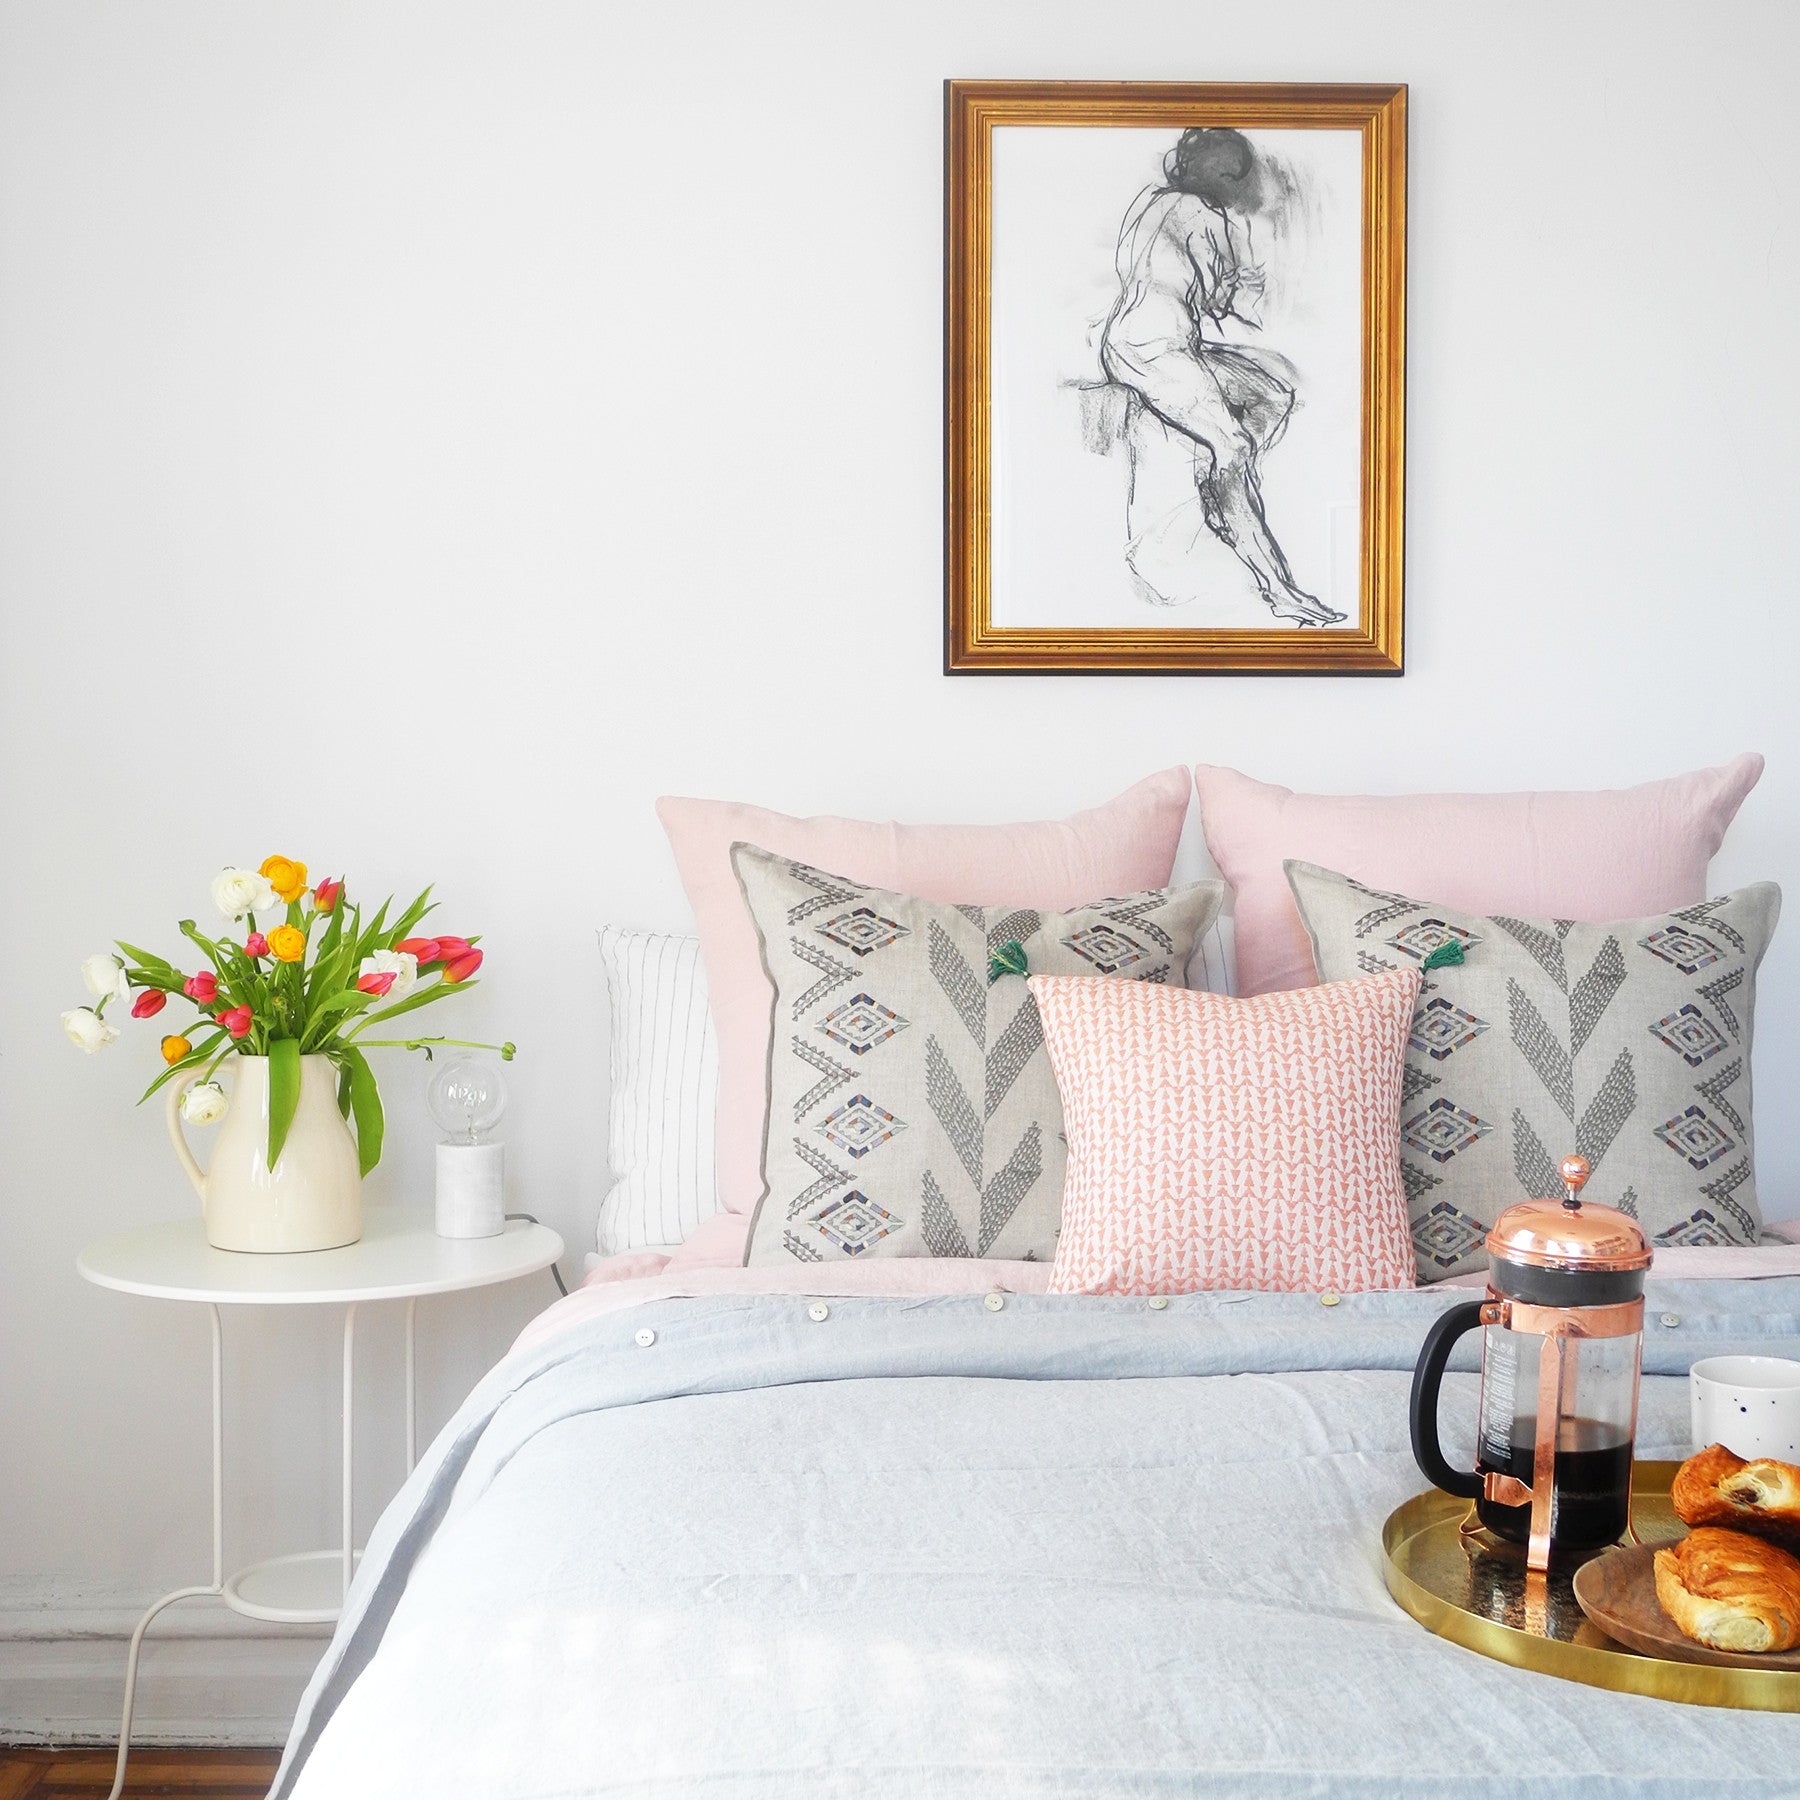 A Linge Particulier Linen Duvet in Cloud Grey gives a gray and dove grey color to this duvet for a colorful linen bedding look from Collyer's Mansion